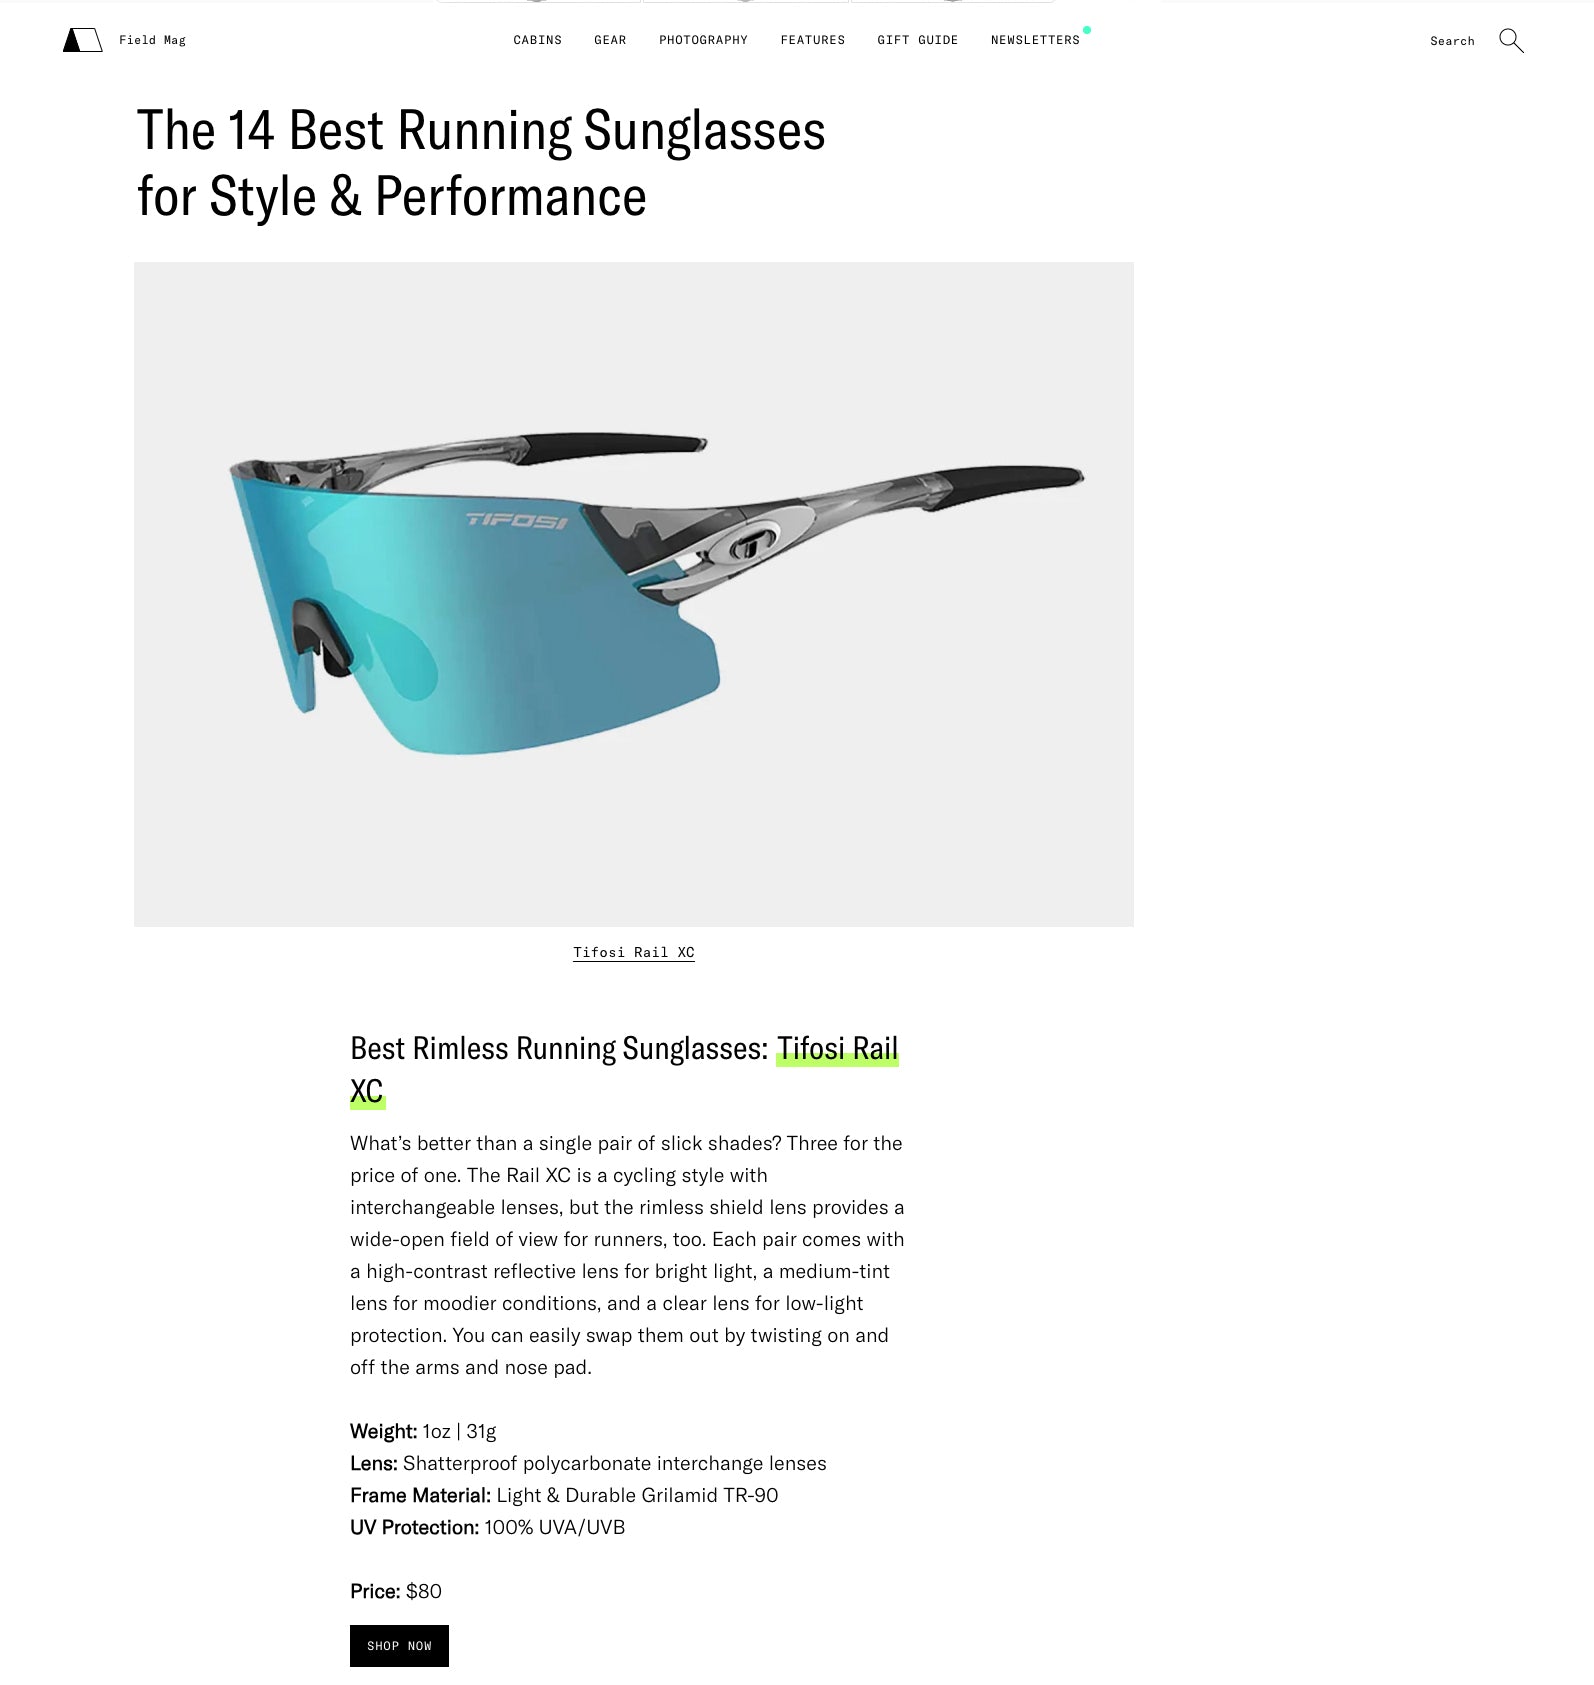 The 14 Best Running Sunglasses for Style and Performance